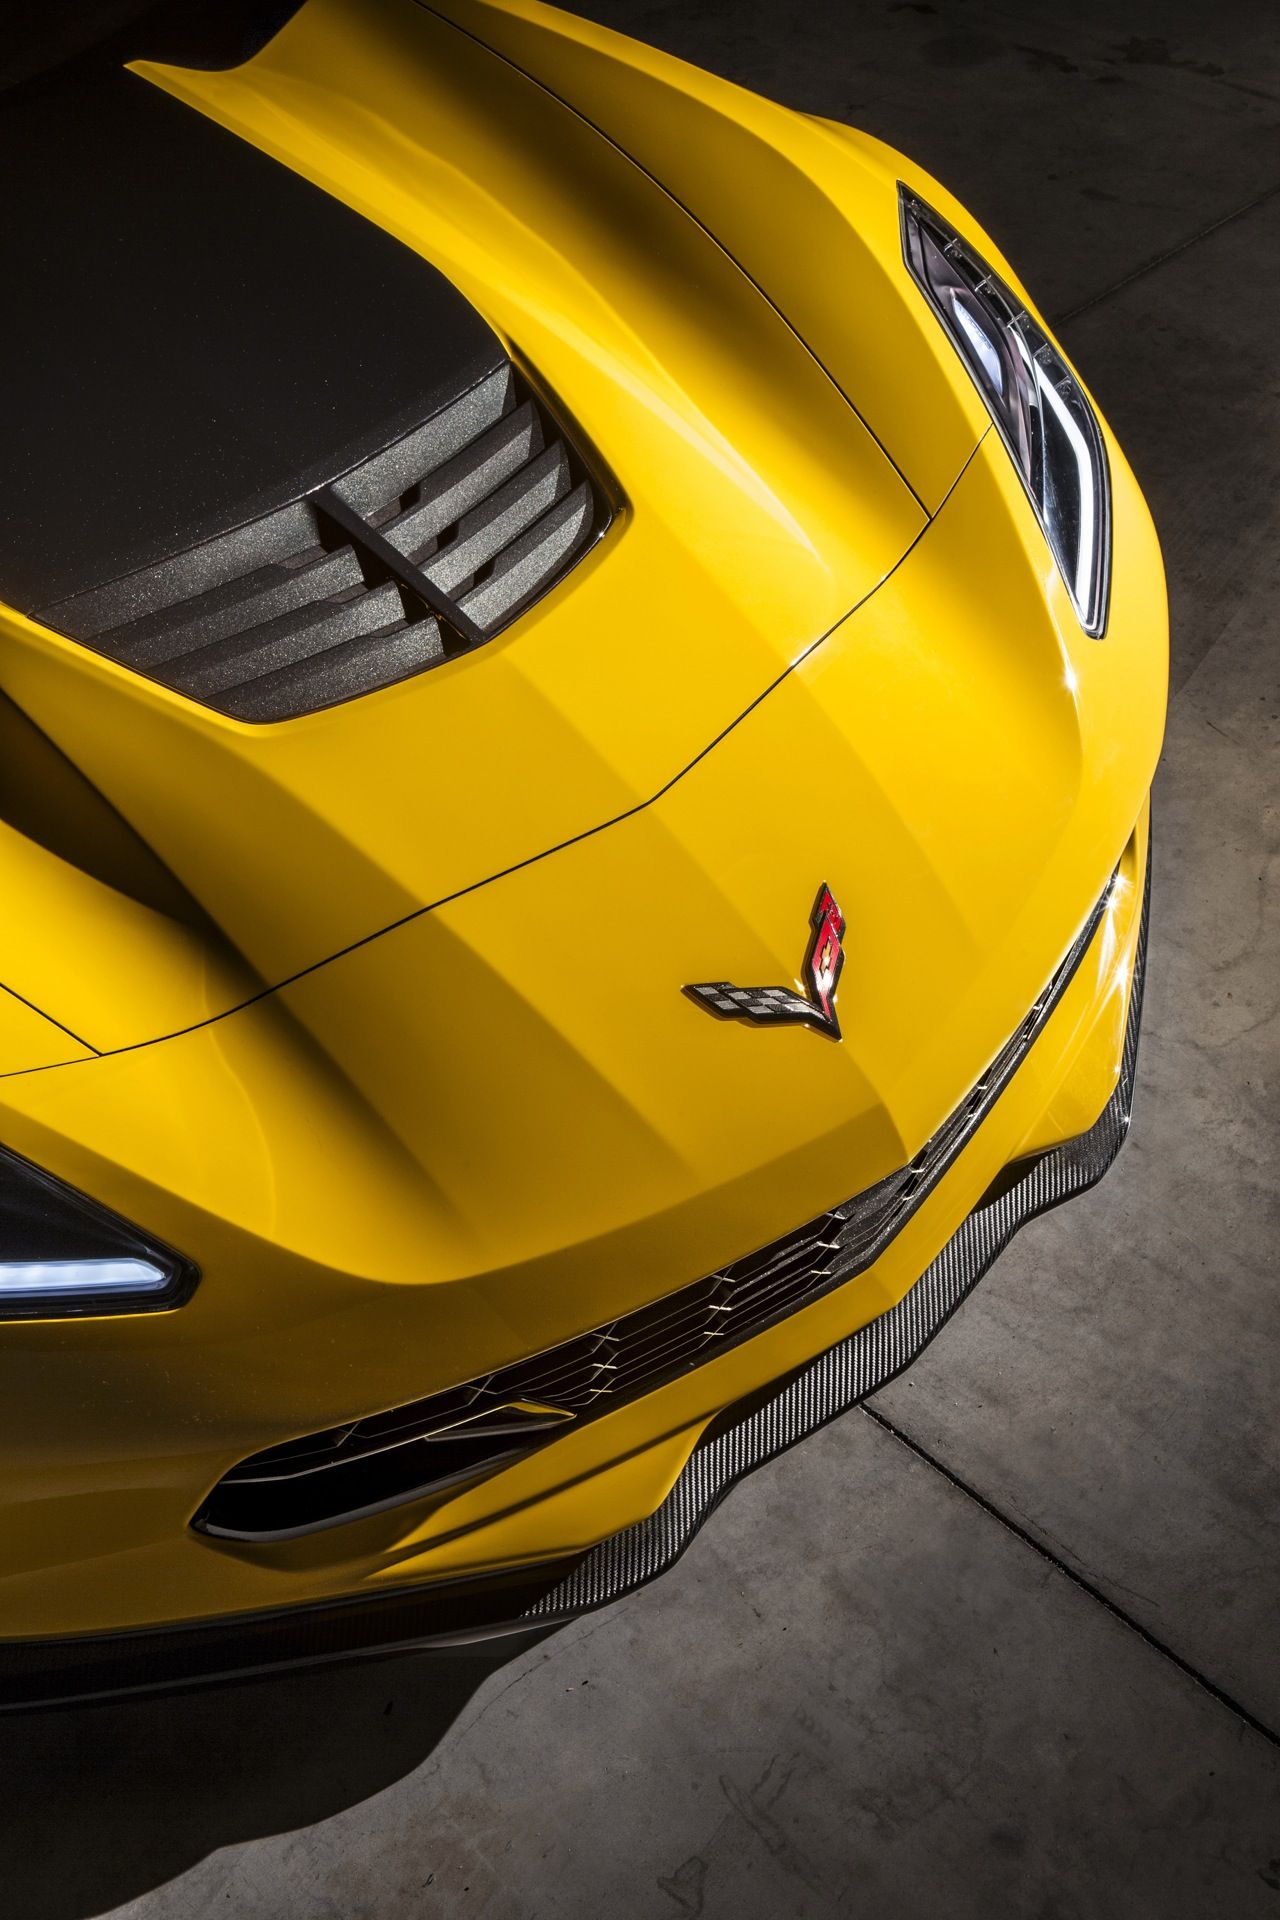 GM 8 Speed In Corvette Z06 Shifts Faster Than Porsche PDK; Here's How